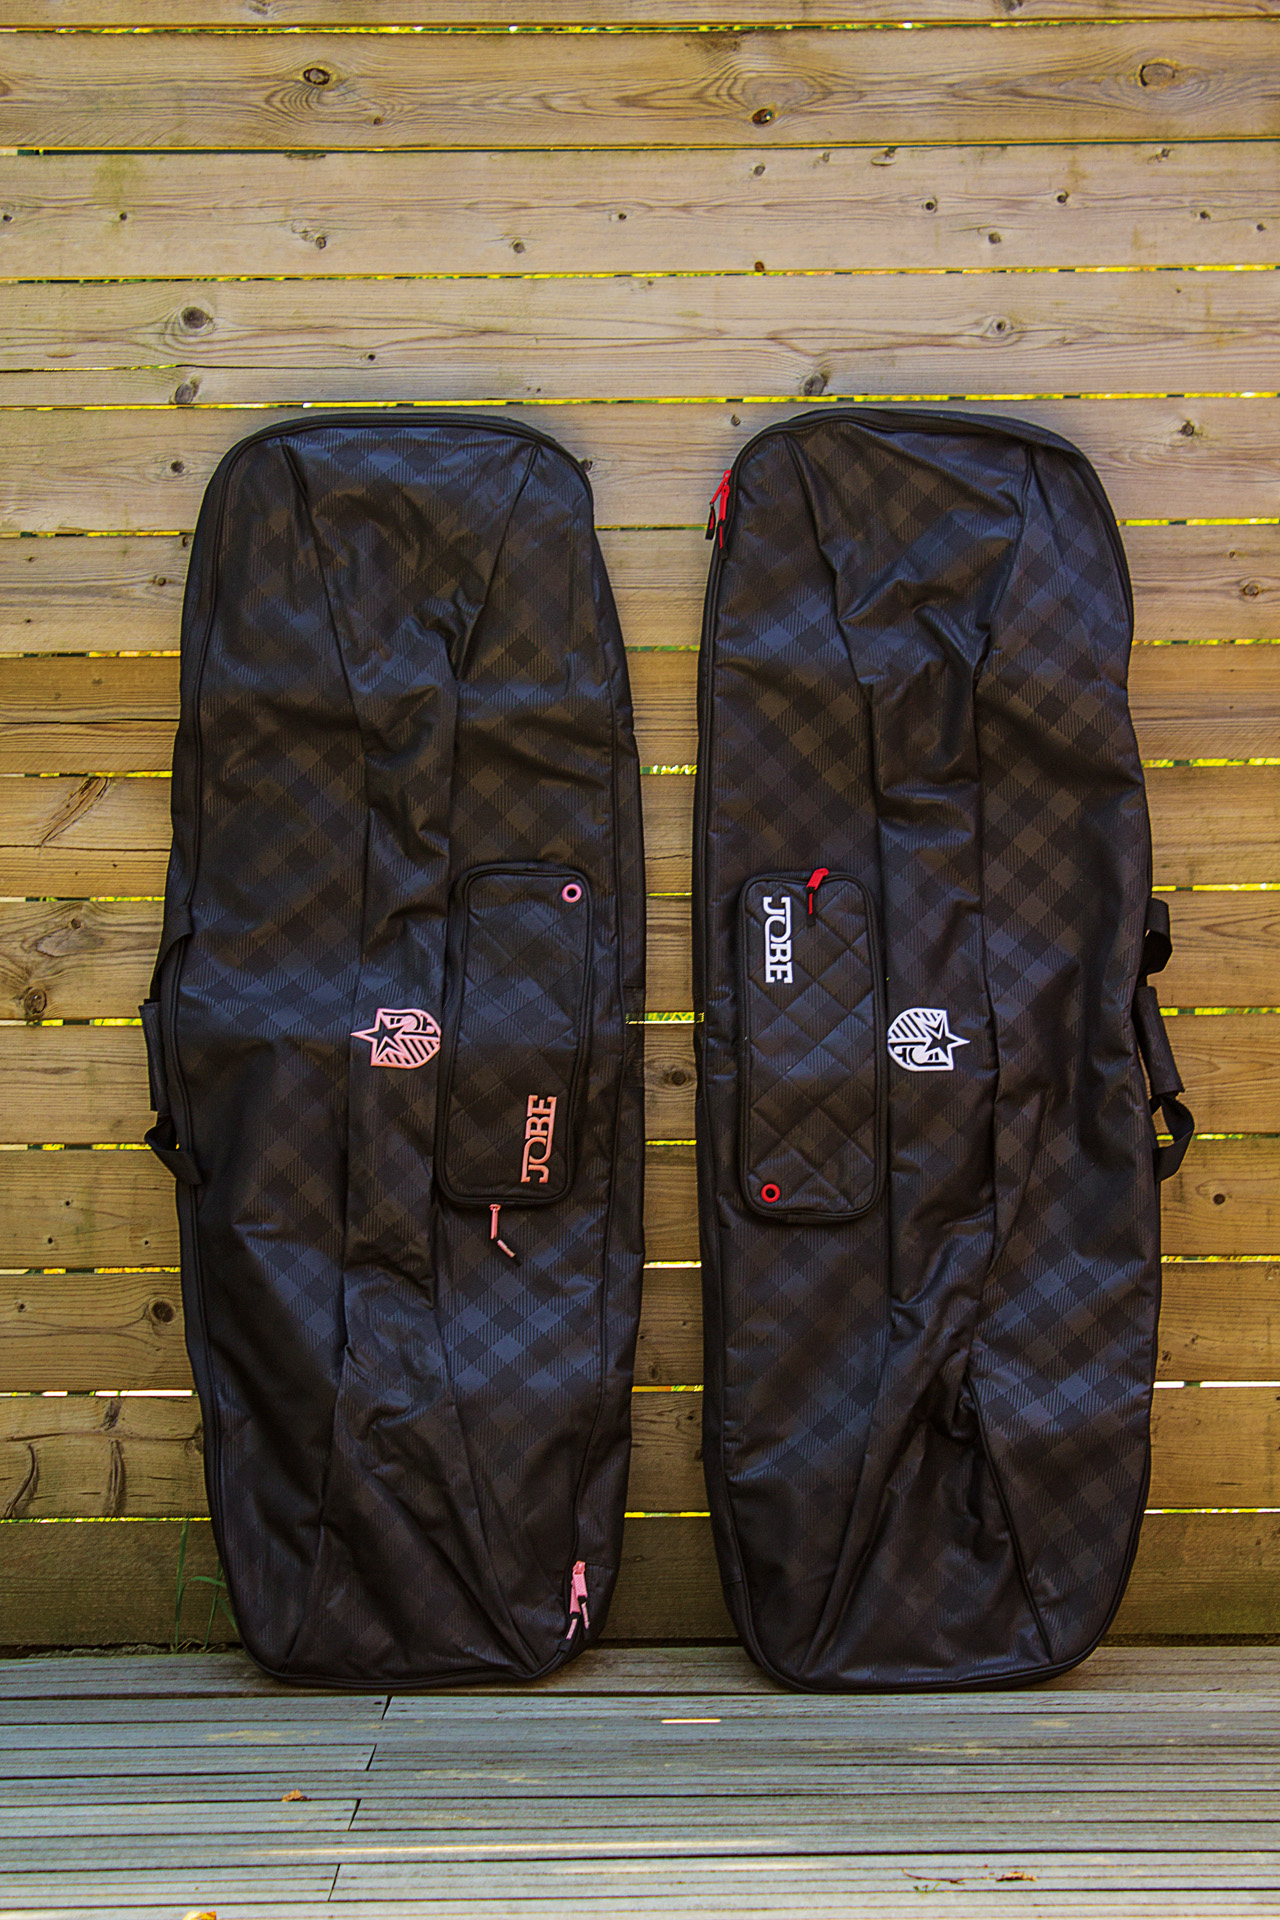 Carry your gear anywhere with the Jobe bags.